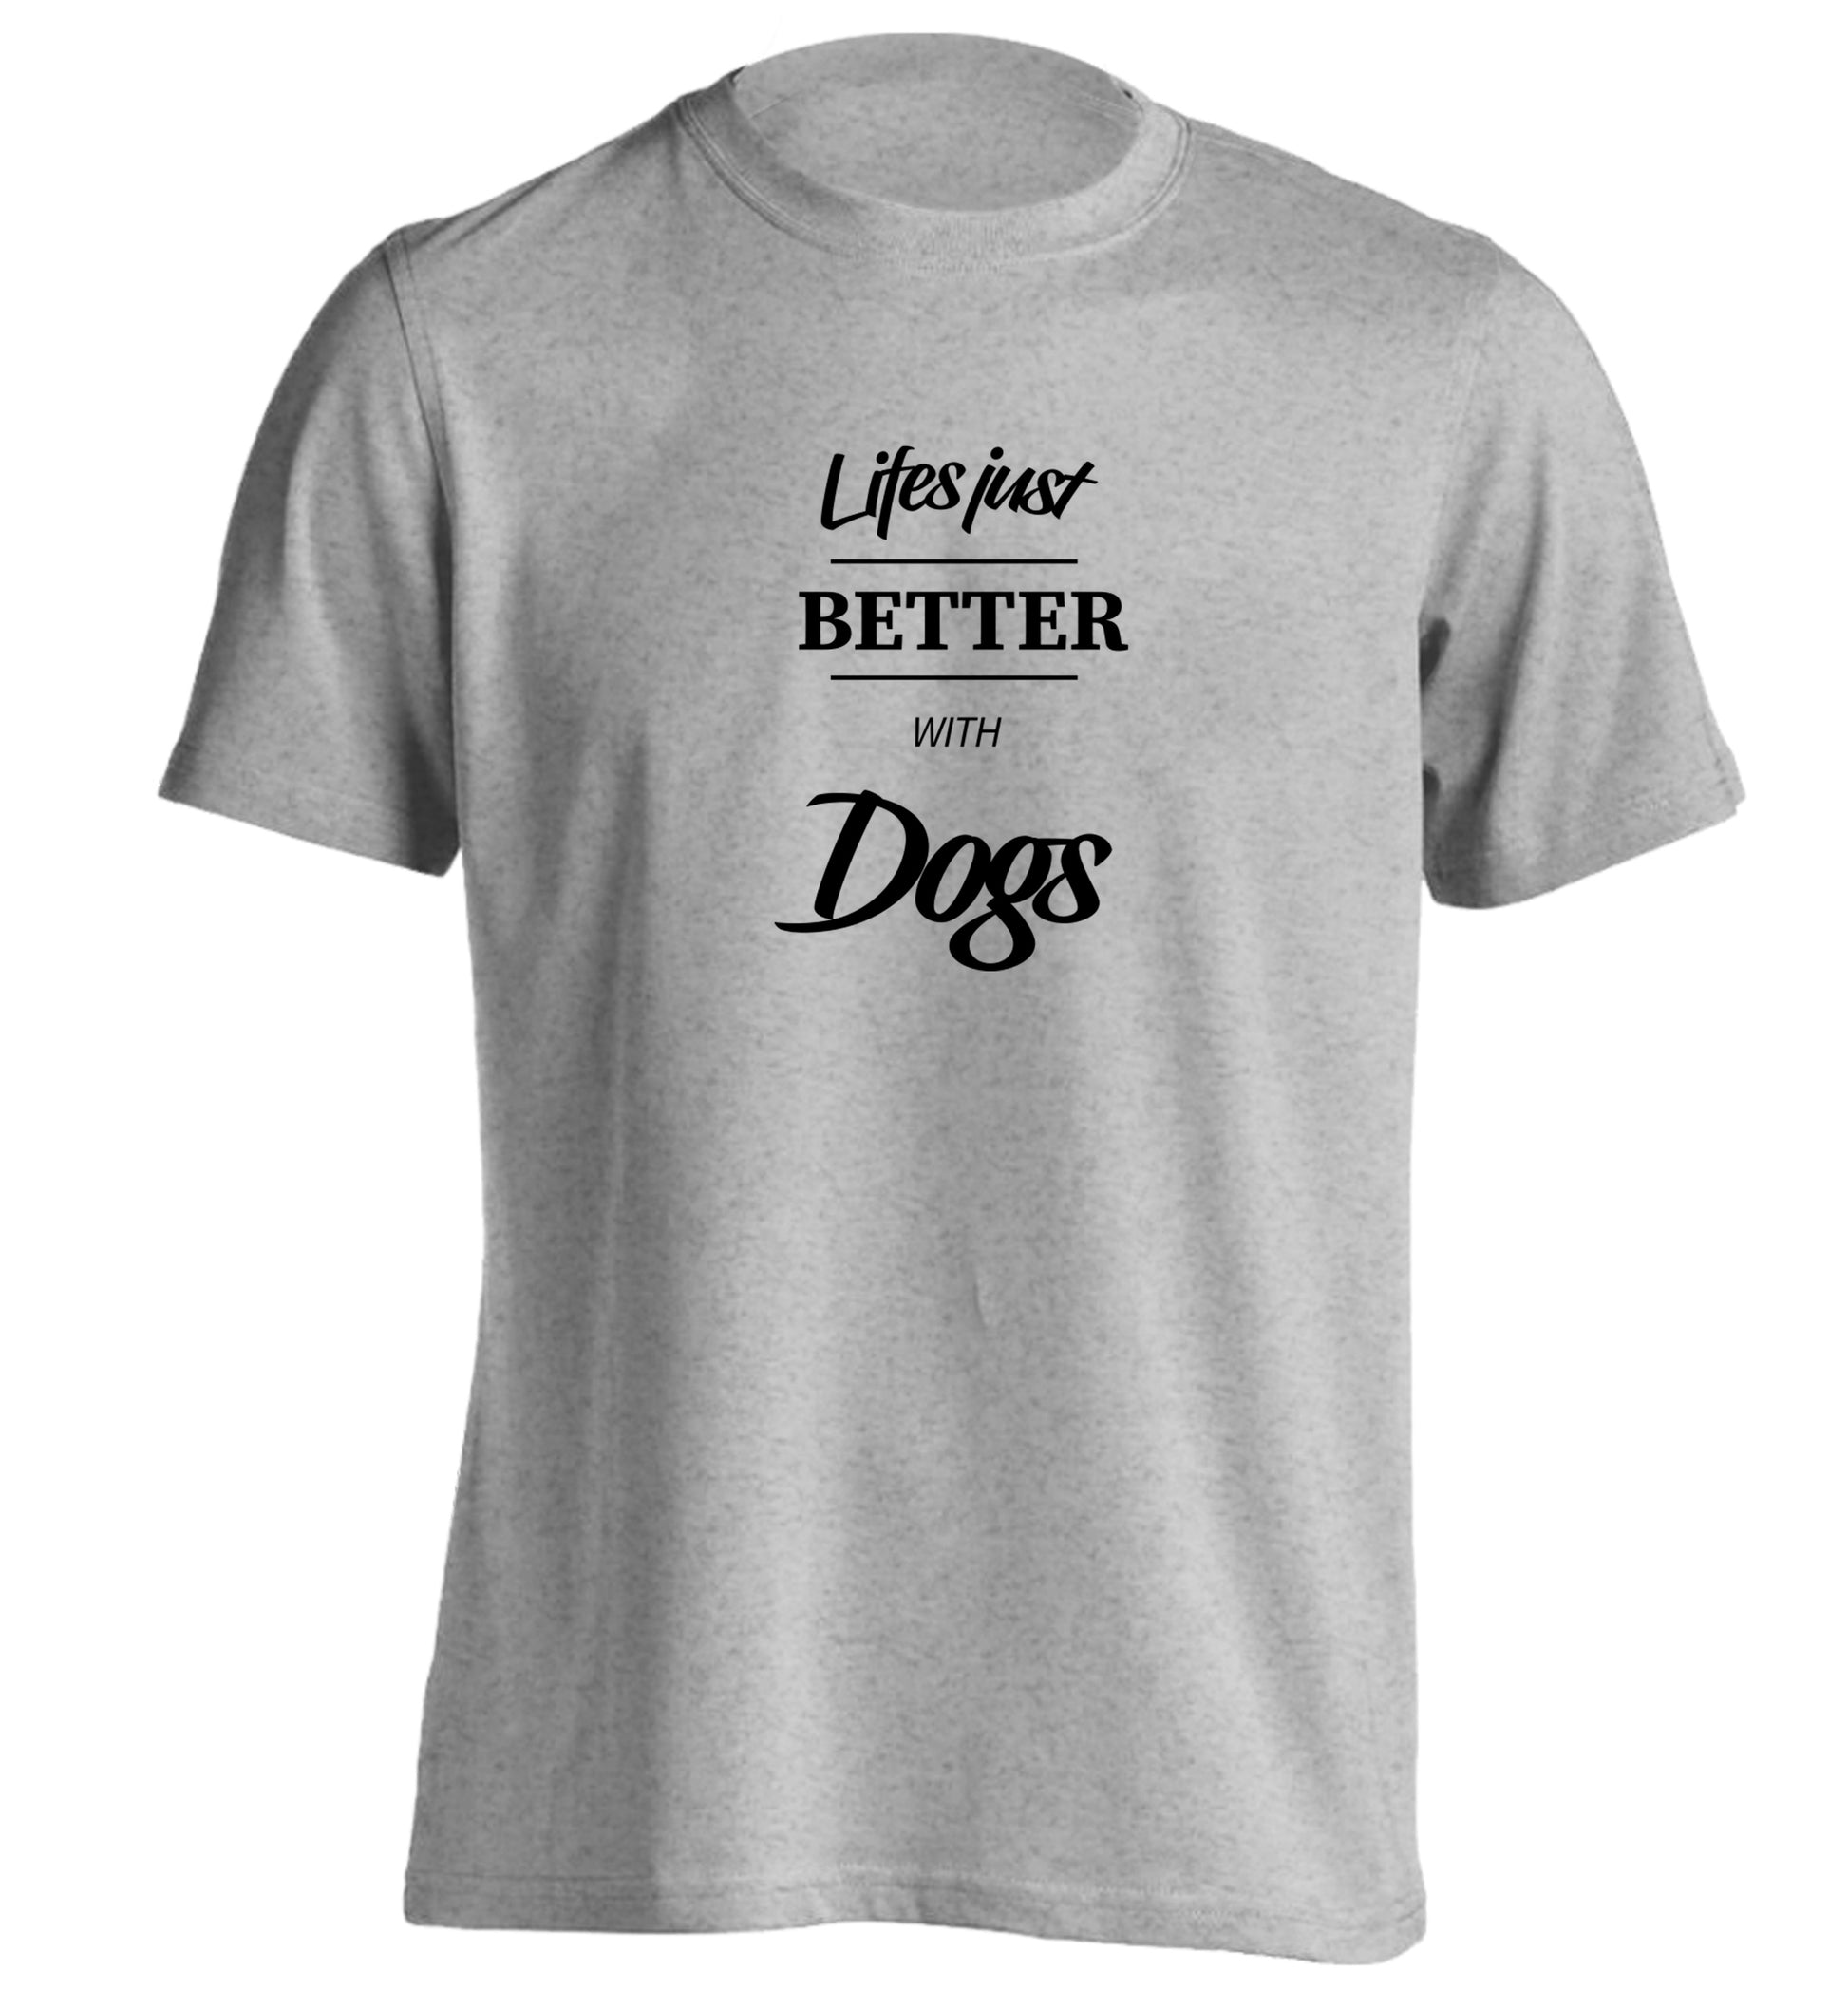 life is better with dogs adults unisex grey Tshirt 2XL